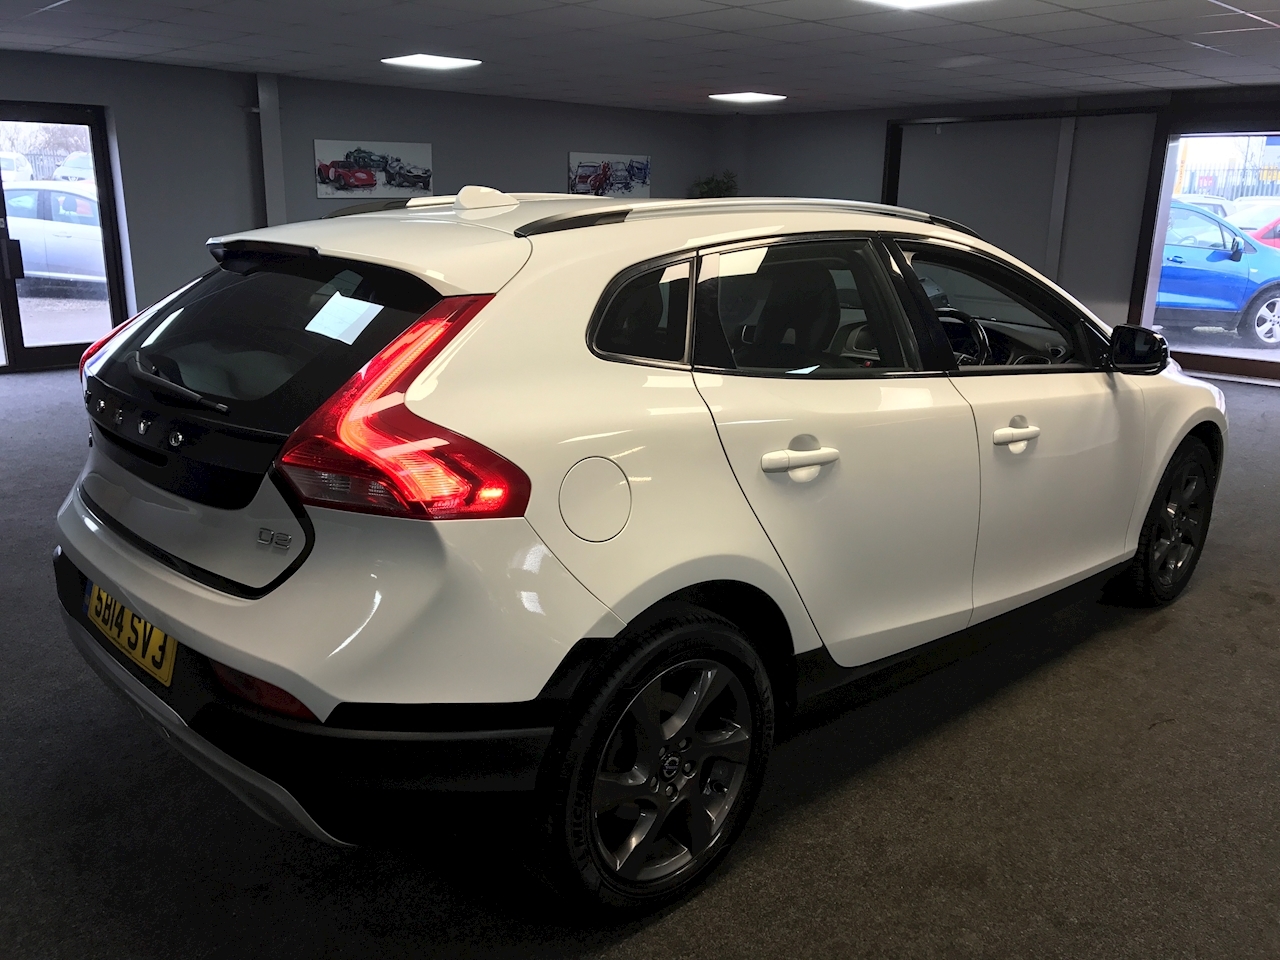 V40 D2 Cross Country Lux Hatchback 1.6 Automatic Diesel